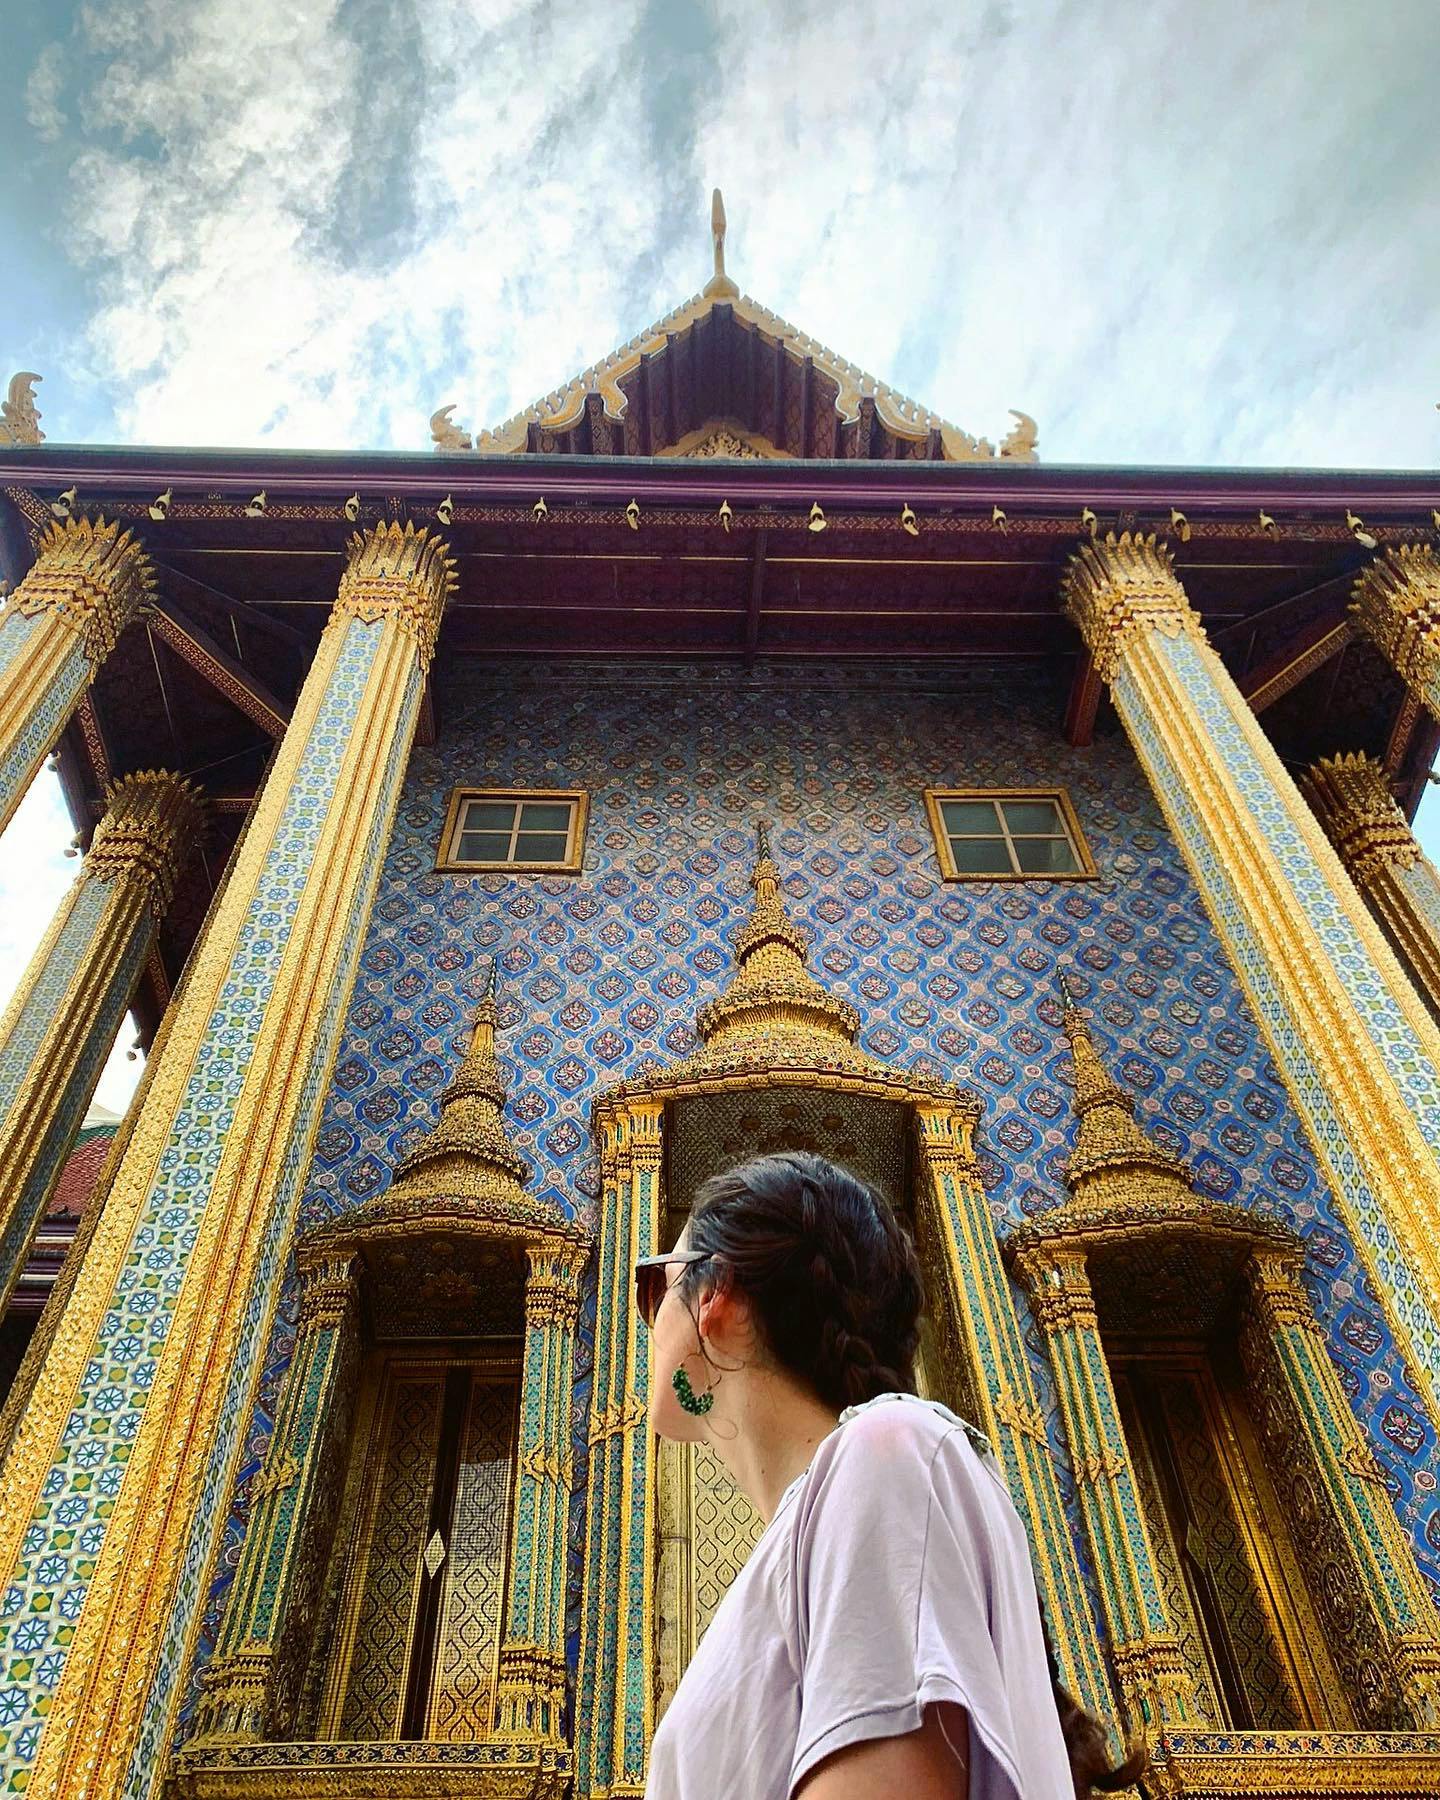 Alyssa outside a temple in Bangkok, Thailand on her travels throughout Asia.